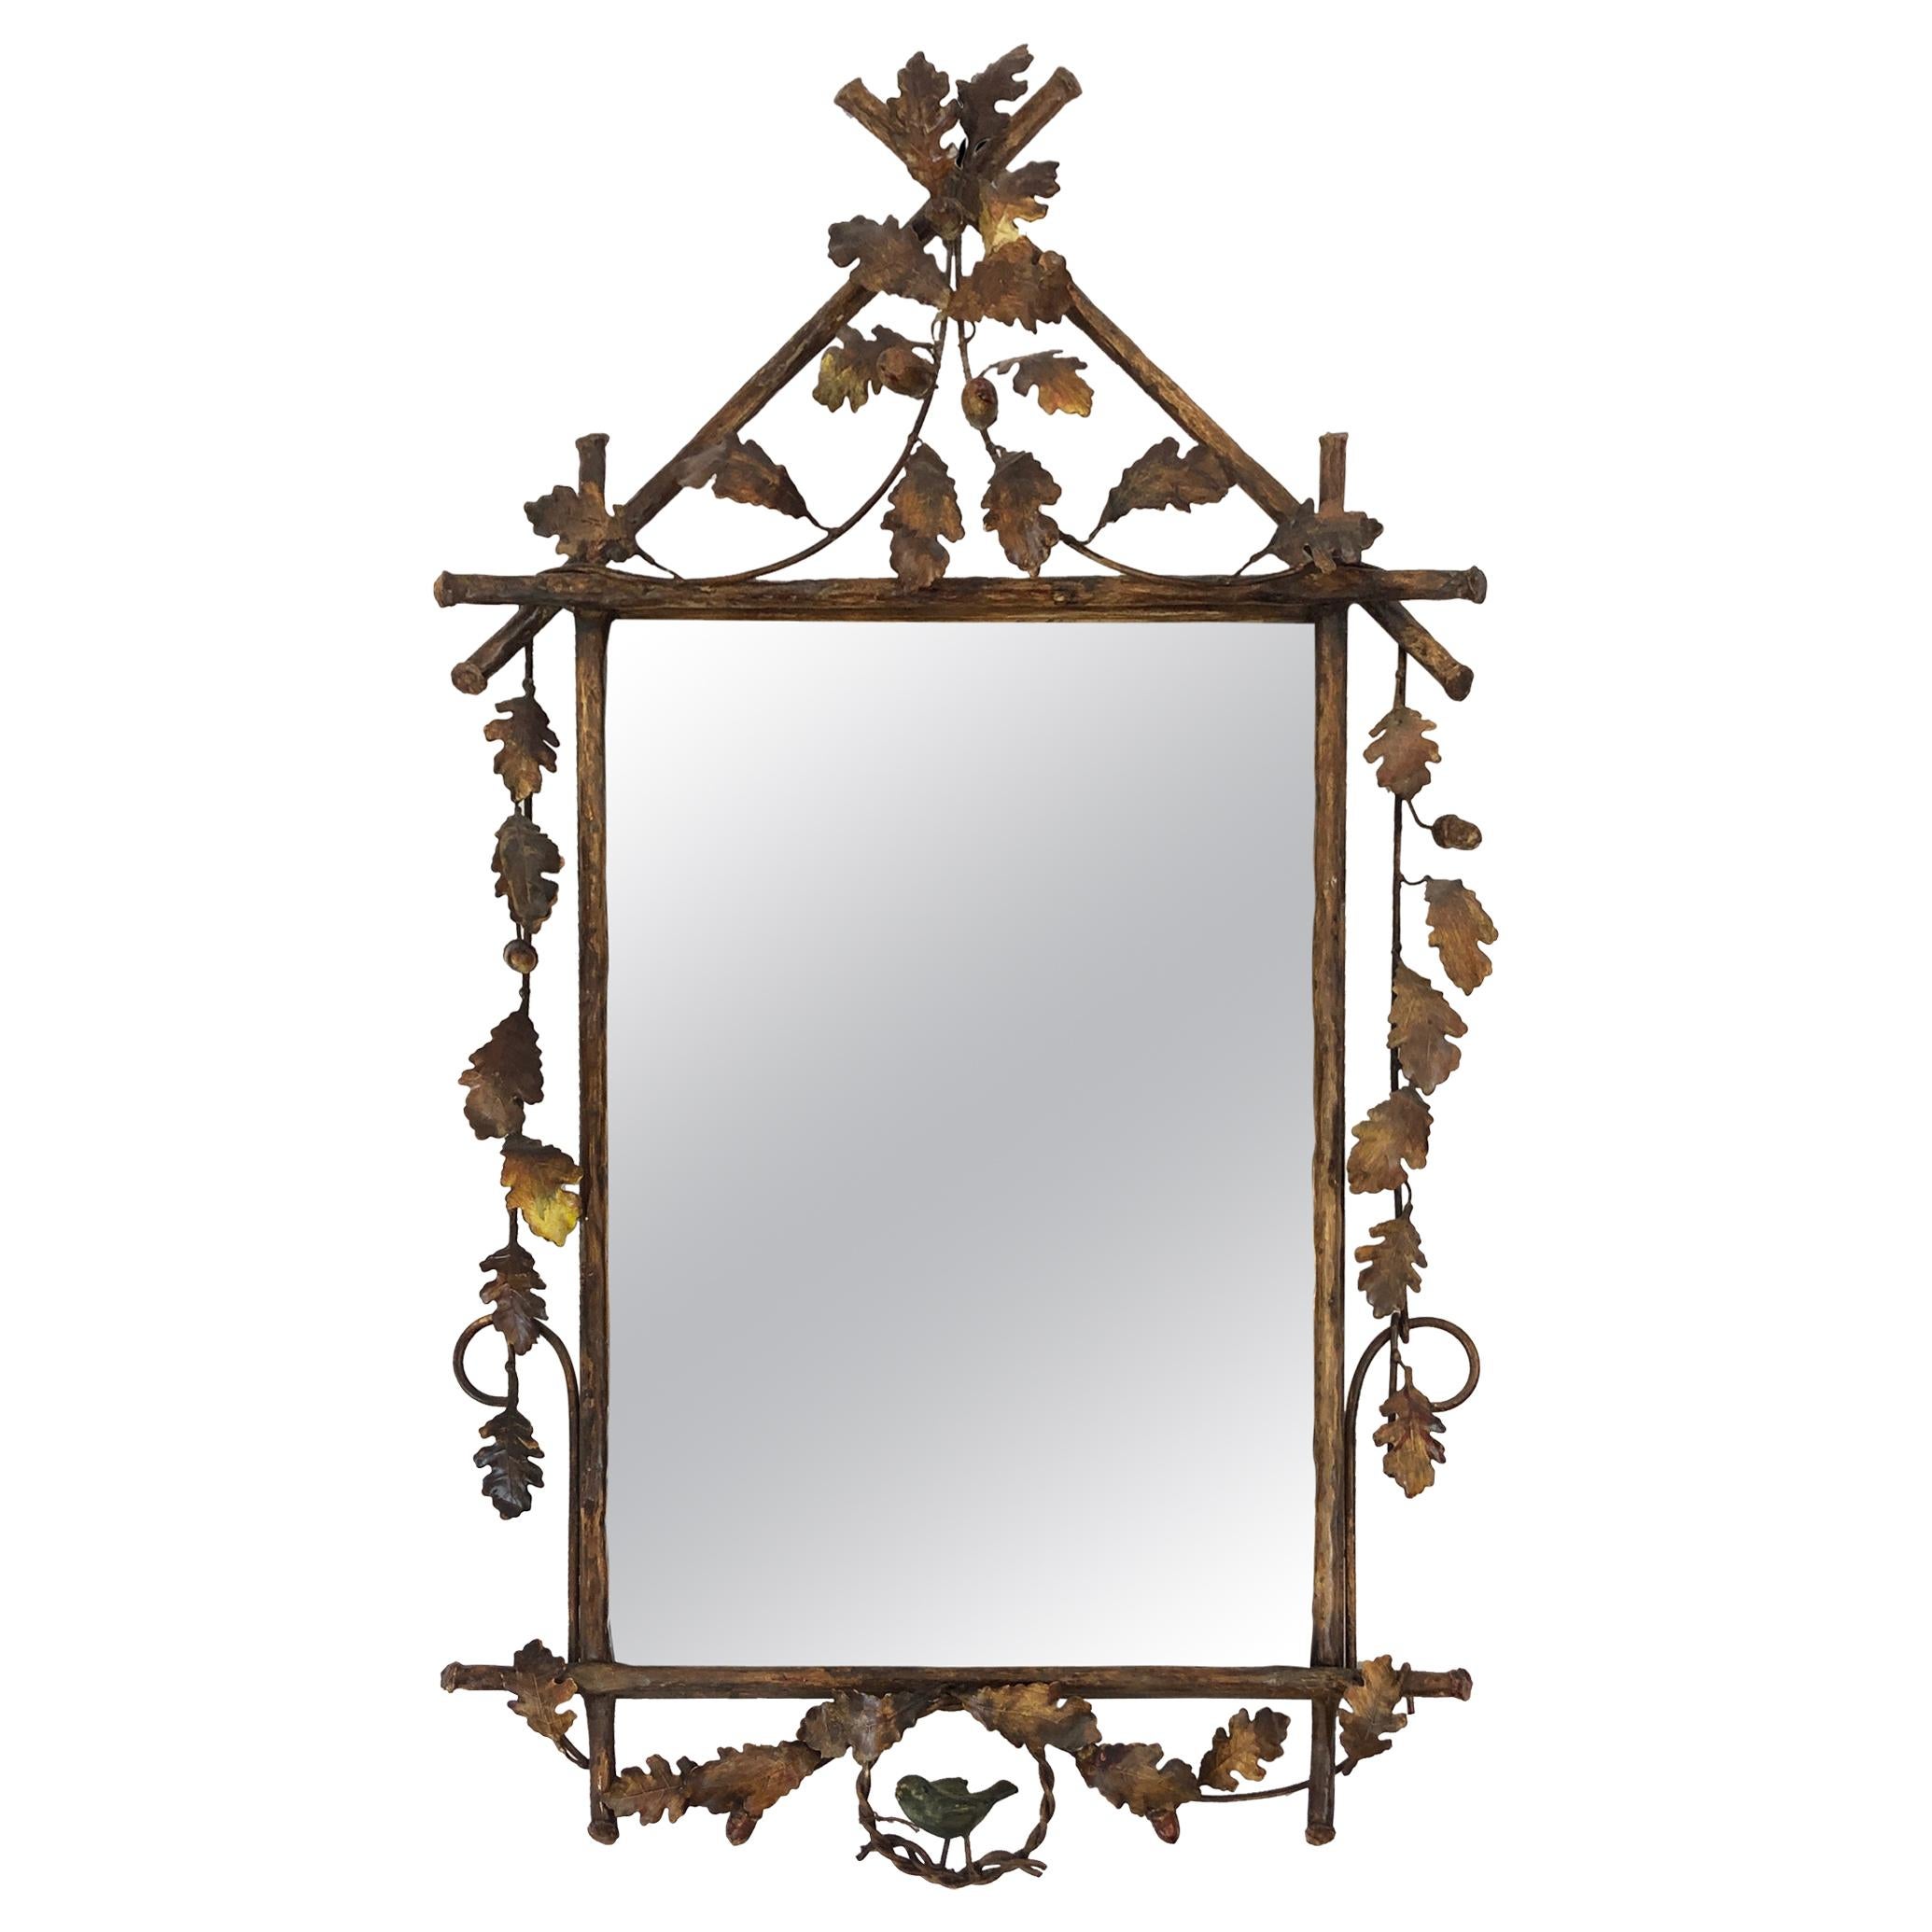 Whimsical Gilt Metal Faux Bois Mirror with Leaves and Bird